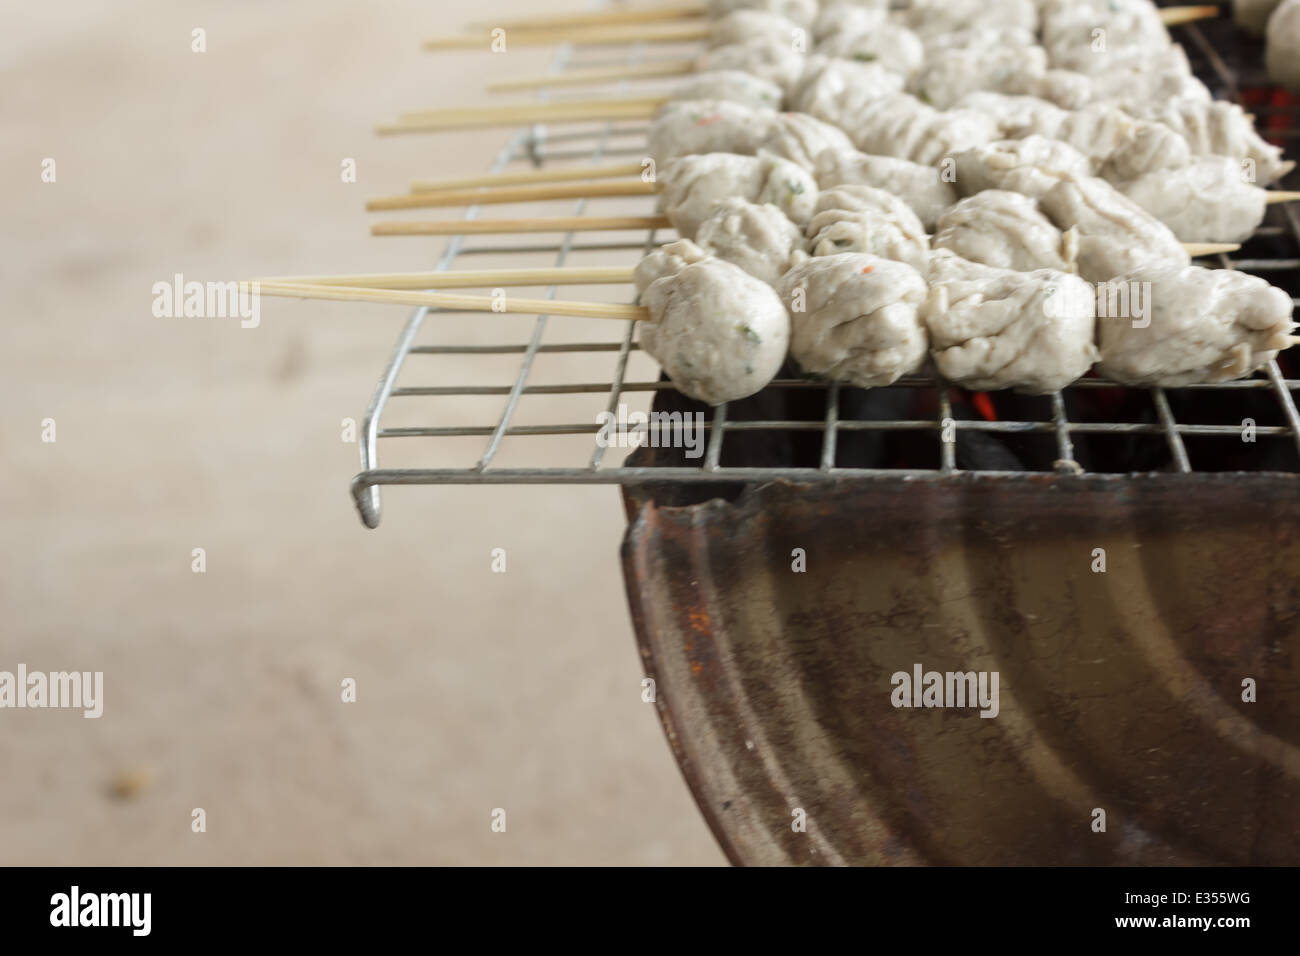 Grilled meat ball Stock Photo